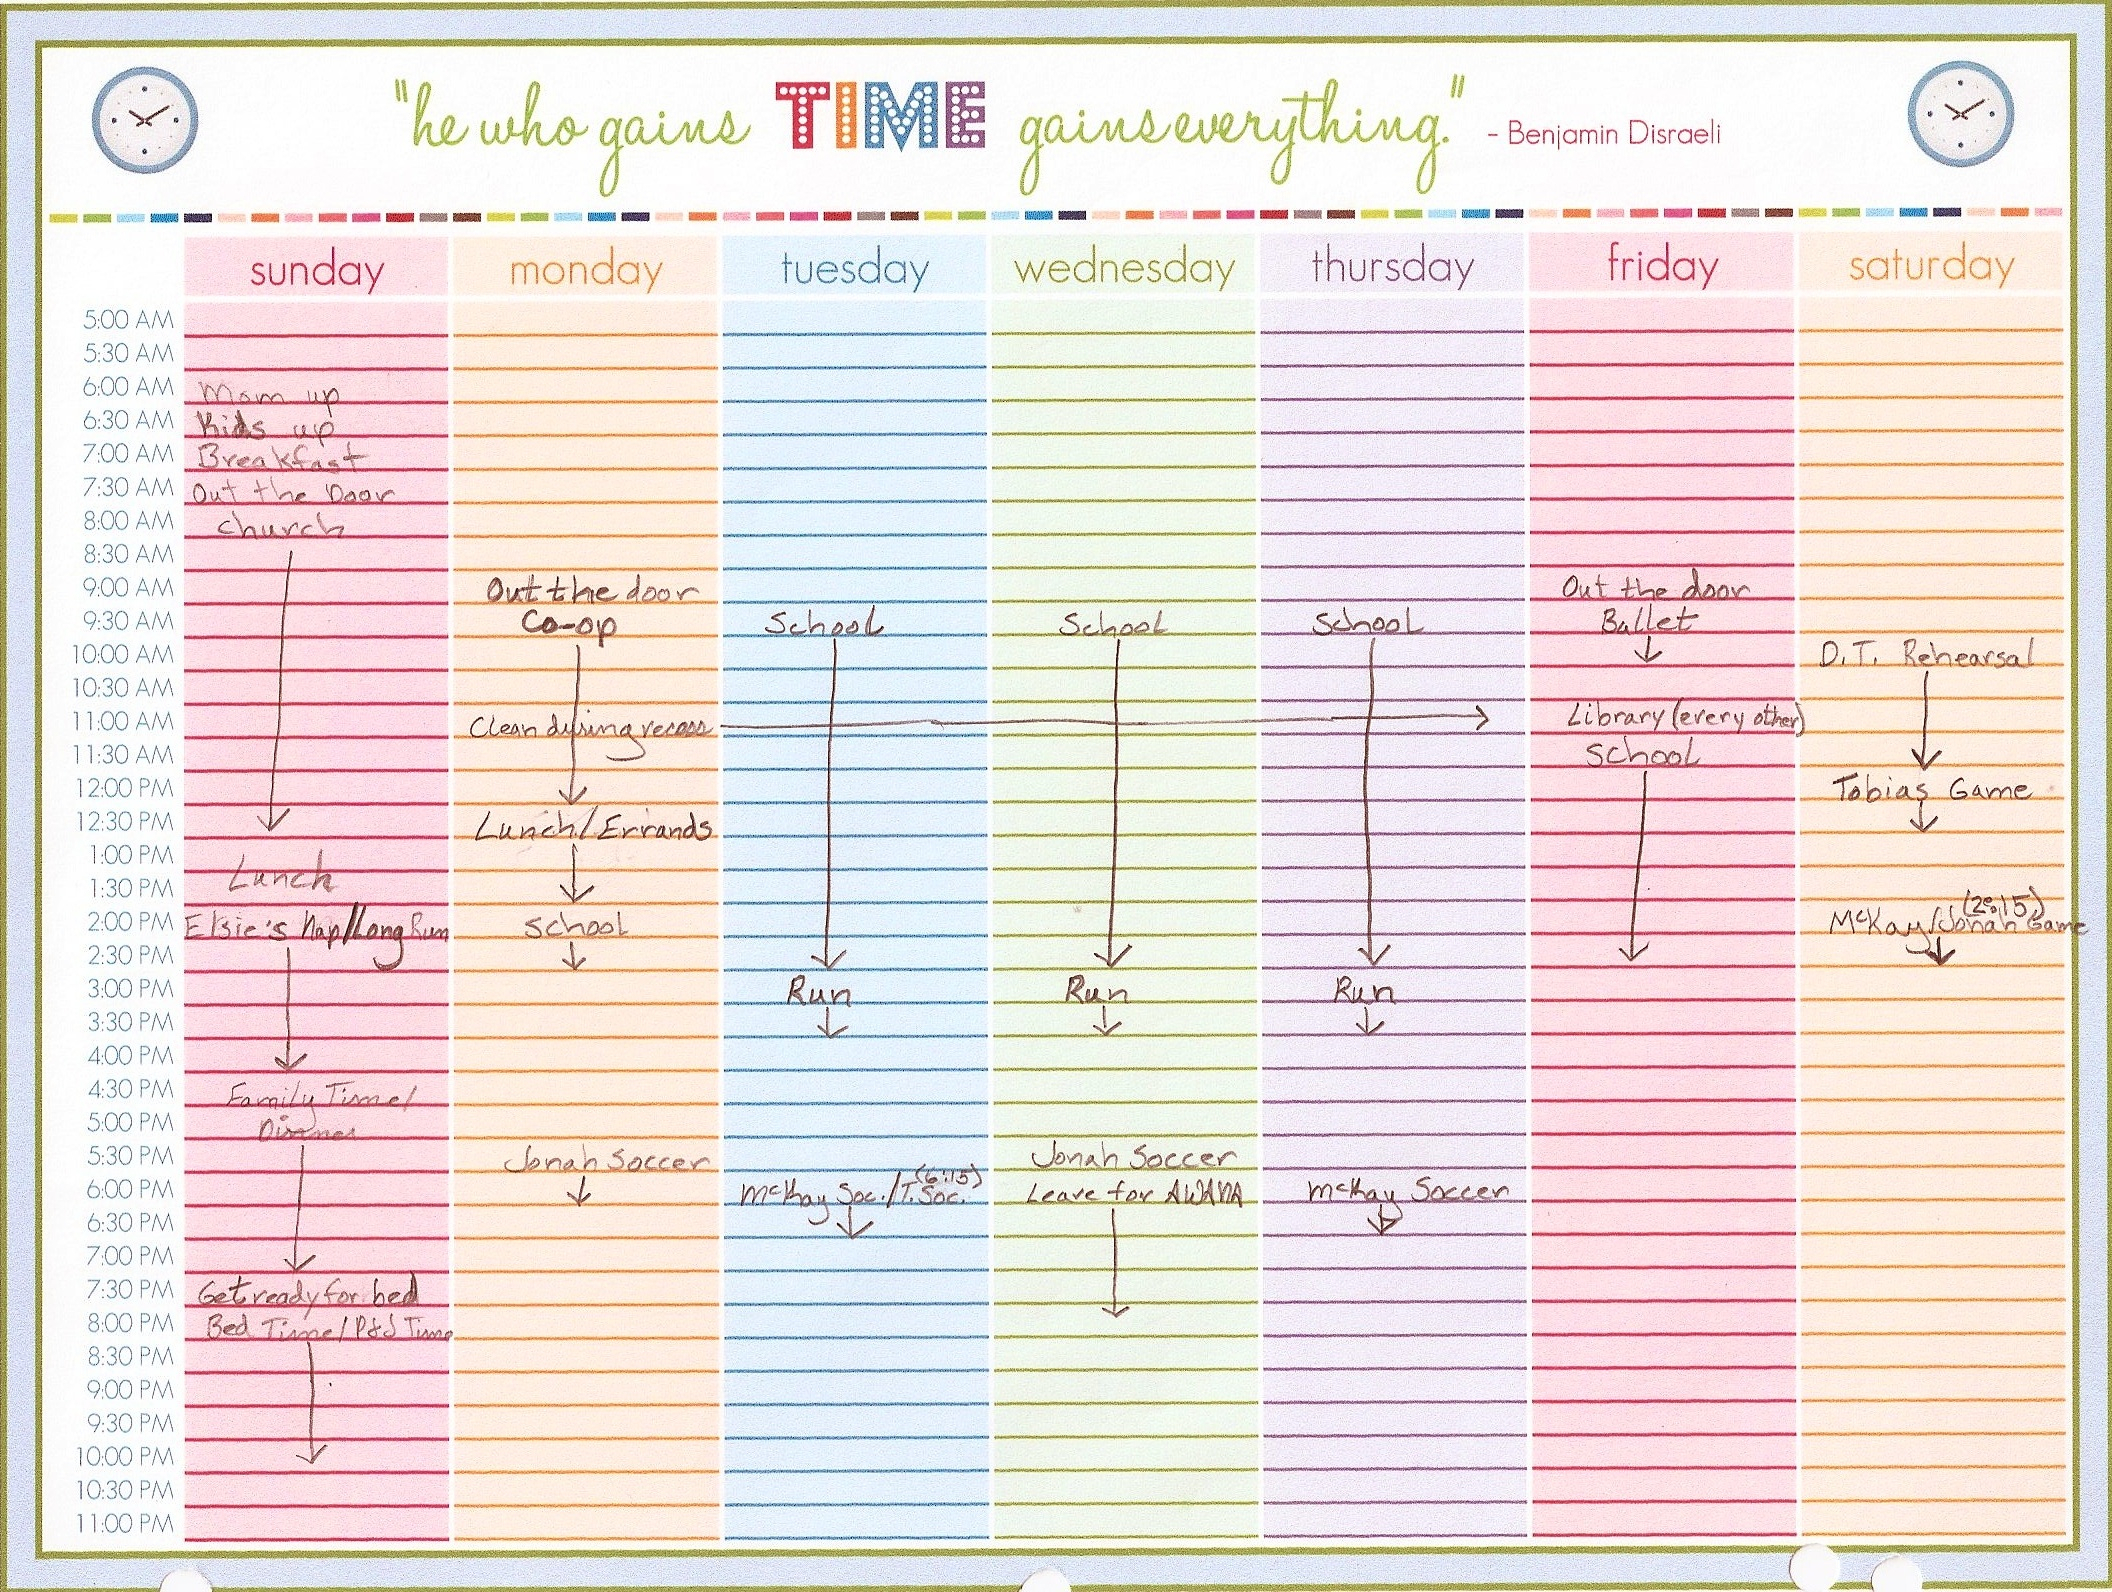 Free printable weekly calendar with time slots 2020 wins